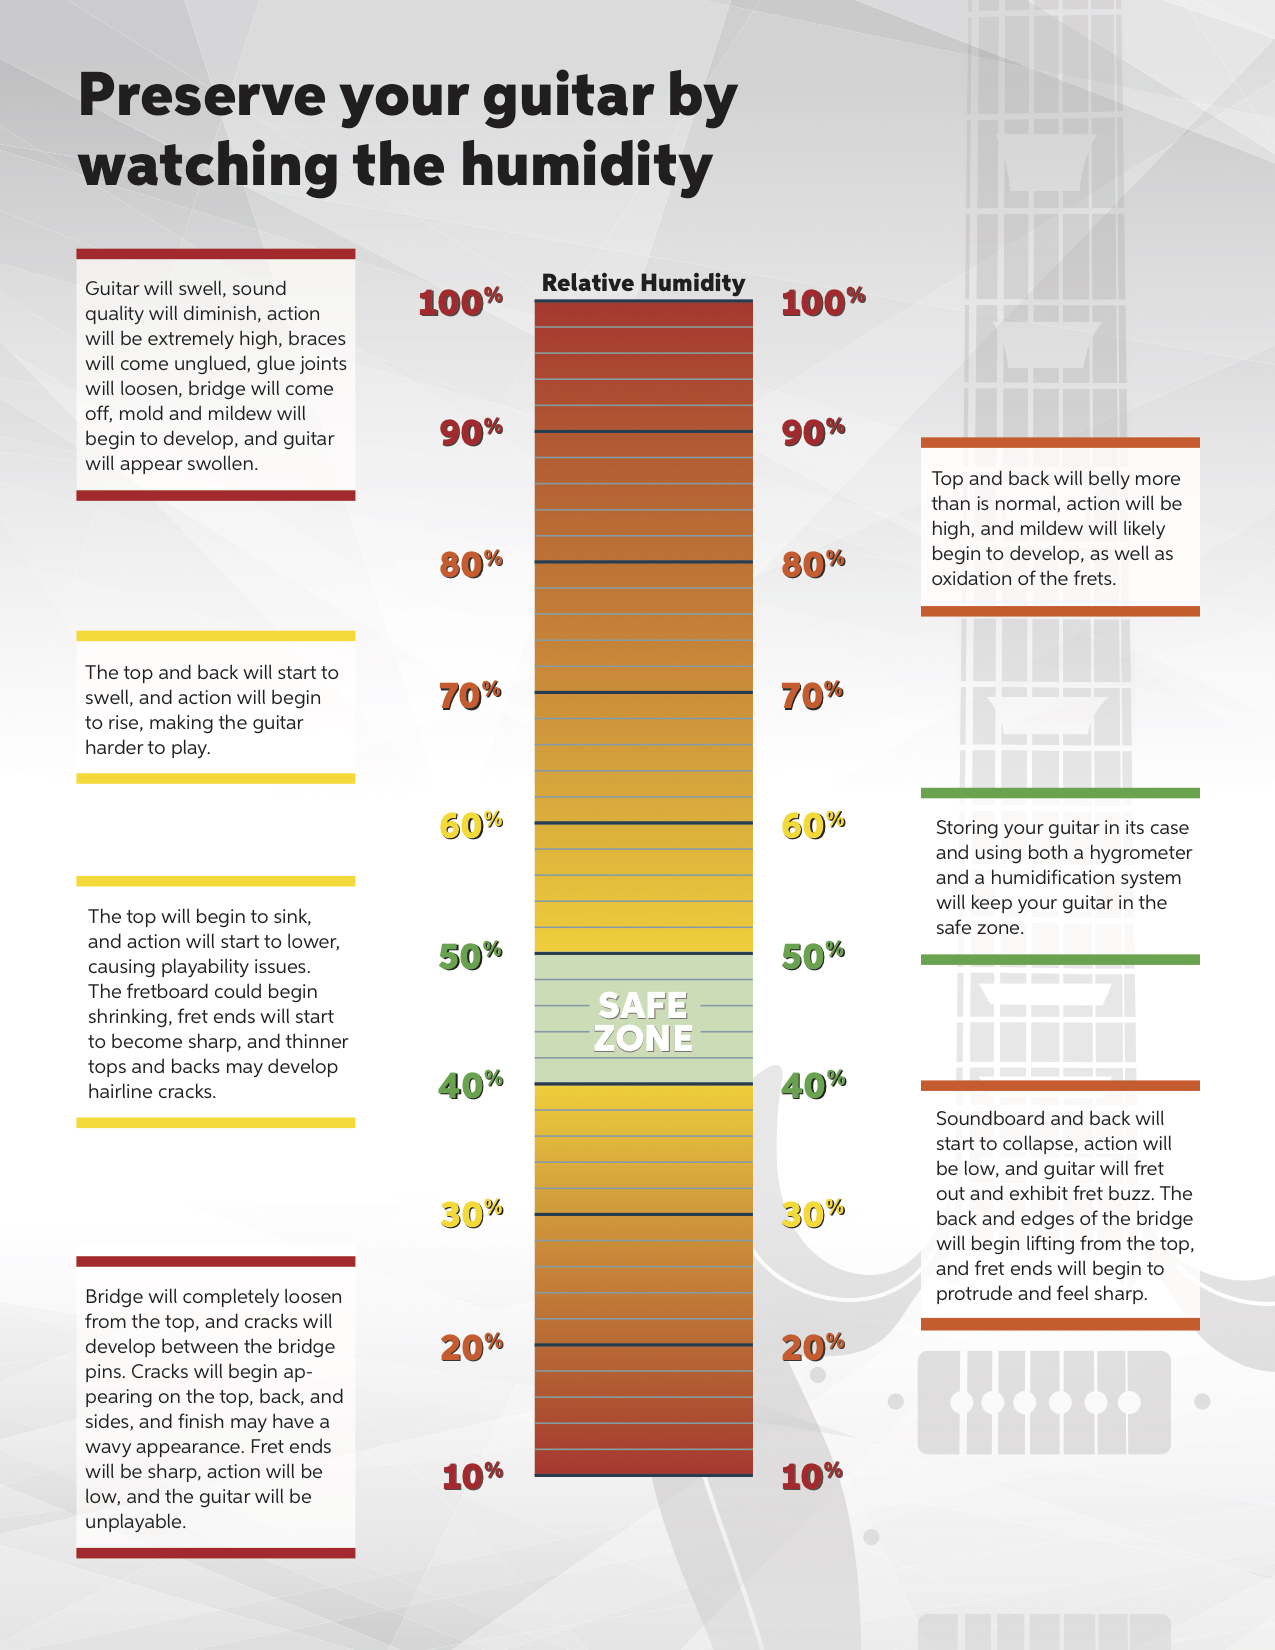 What is the ideal temperature and humidity for your room?